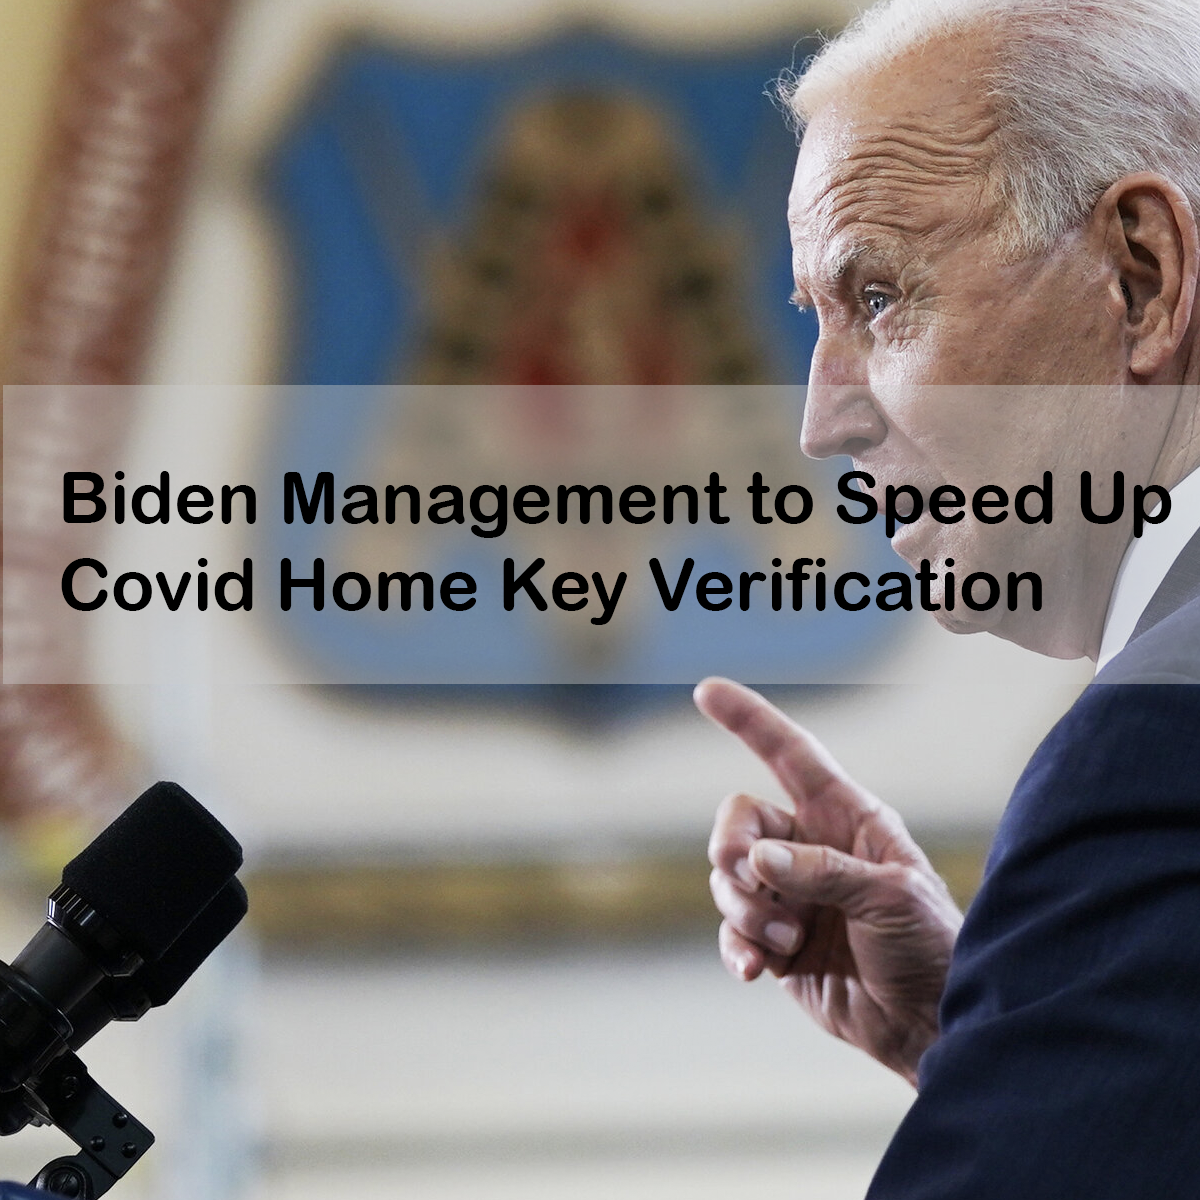 Biden Management to Speed Up Covid Home Key Verification